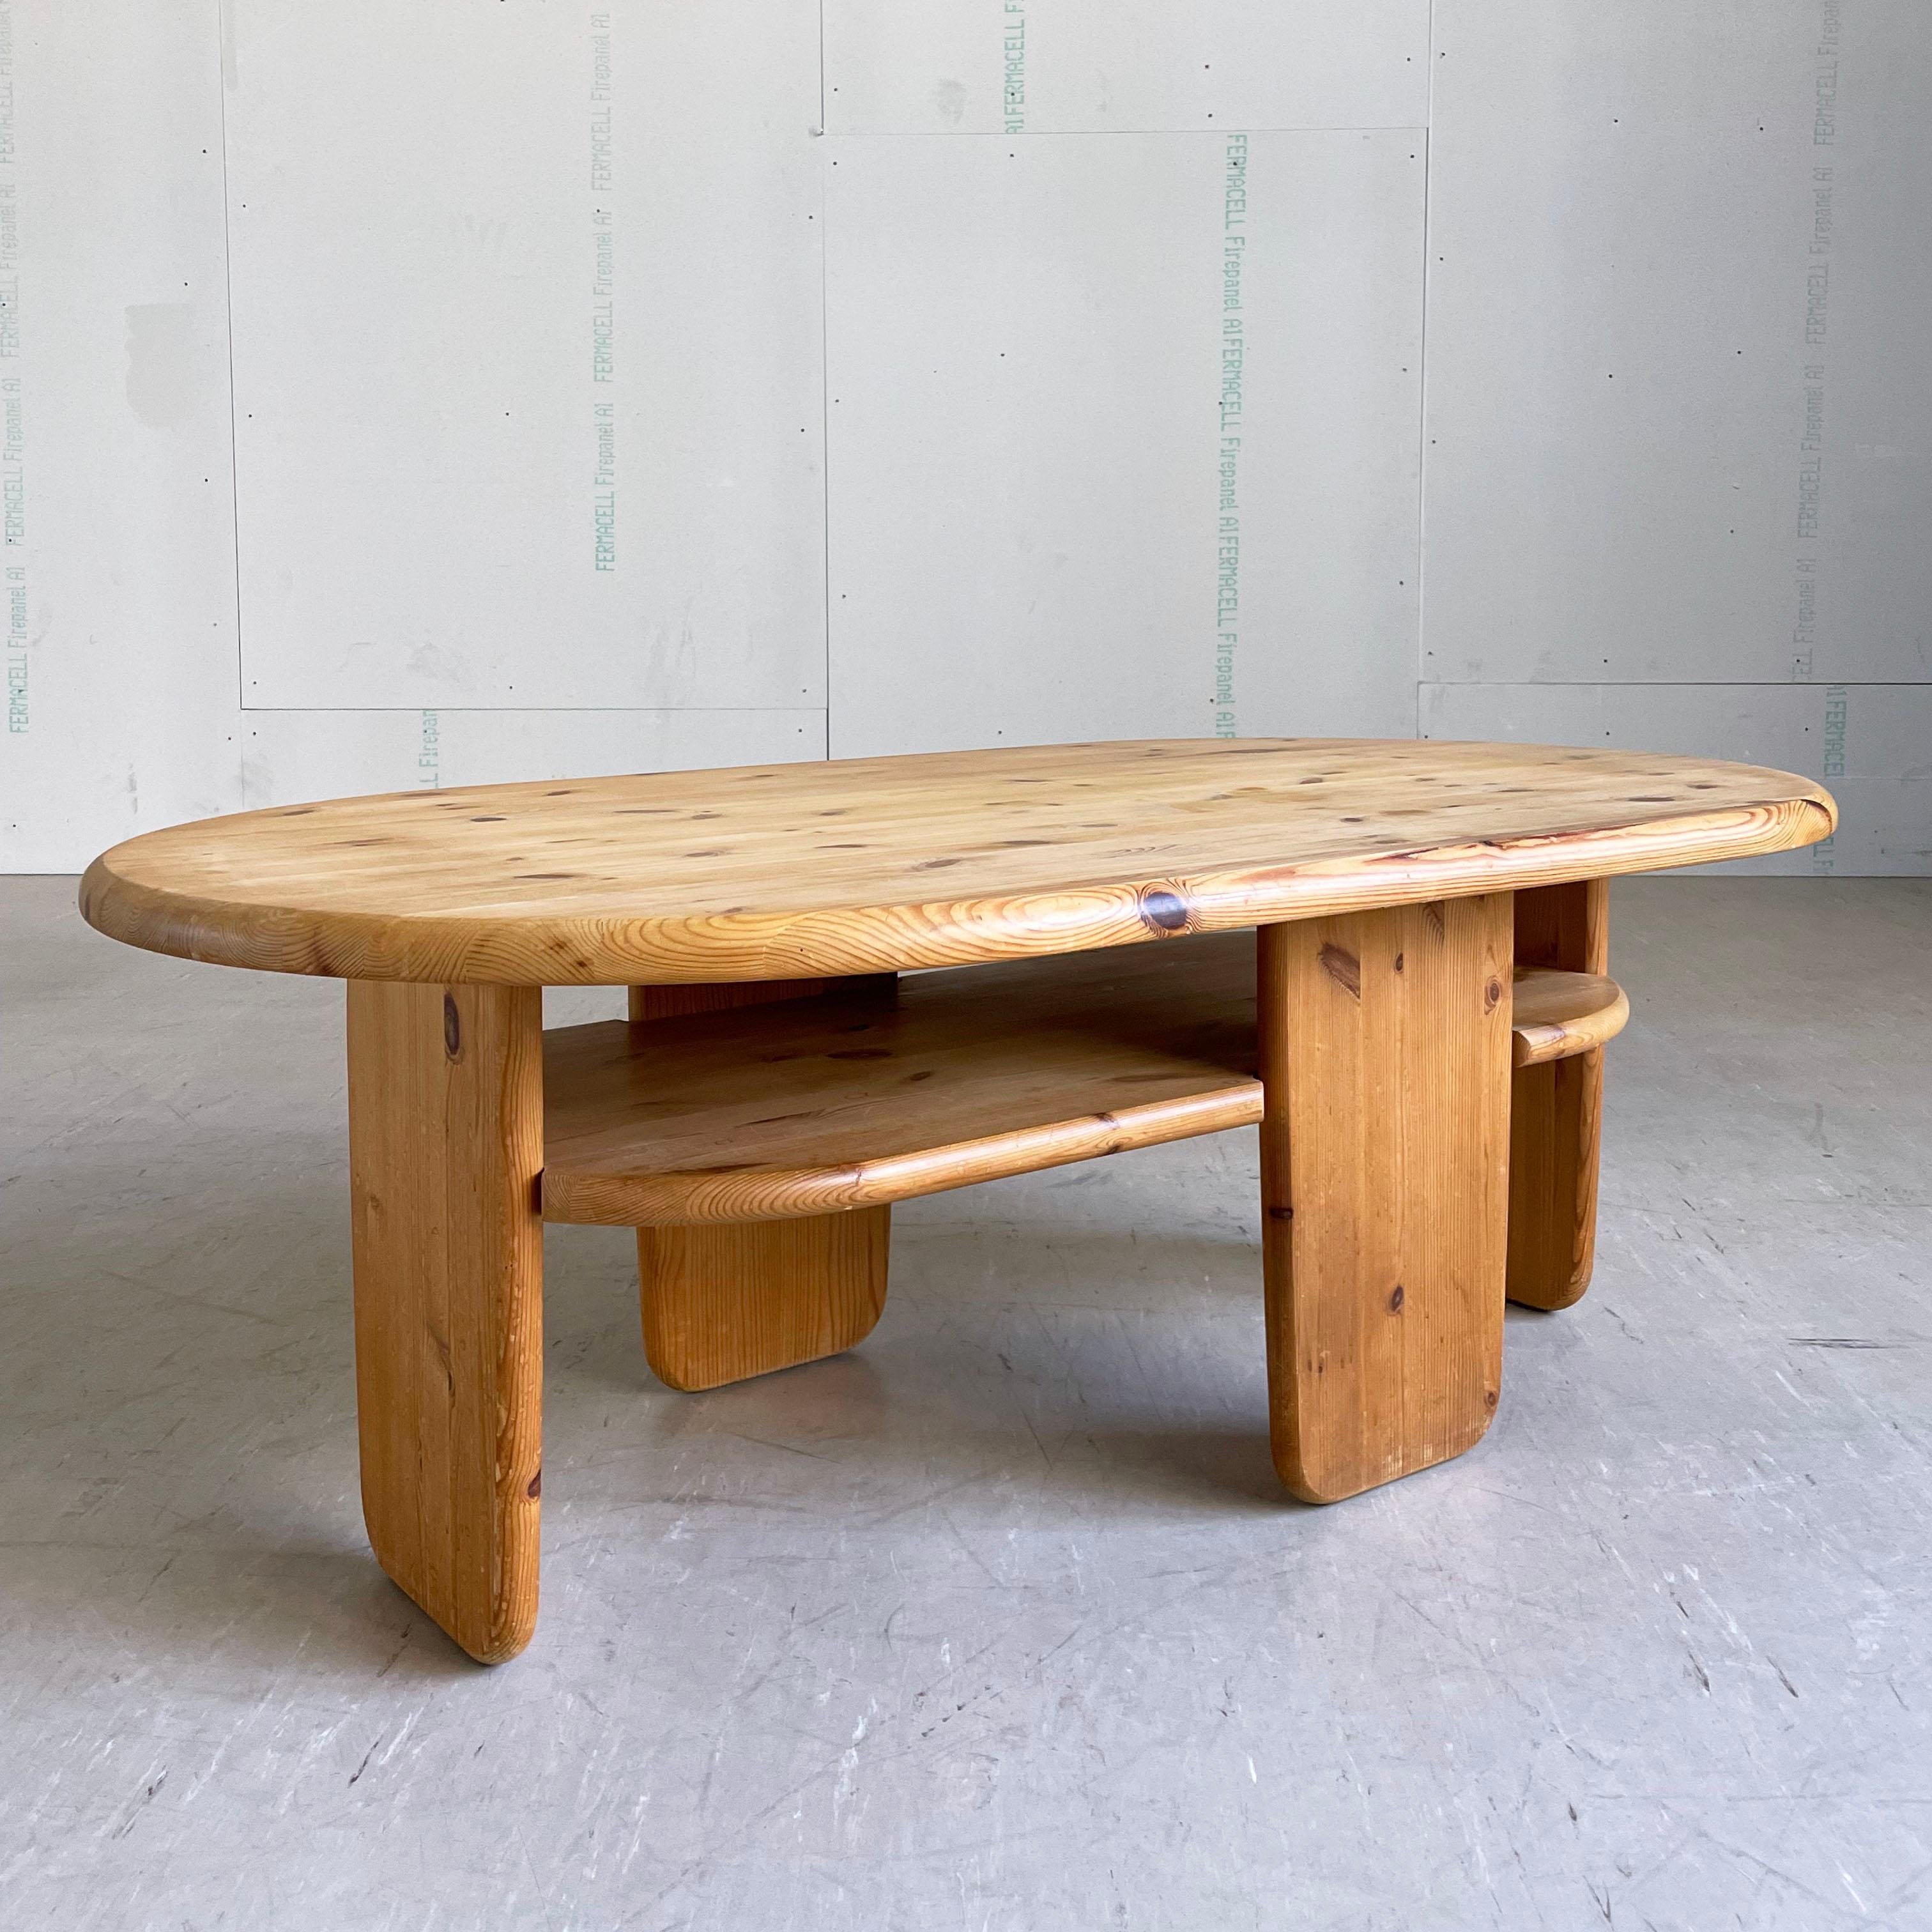 1960's Danish modern oval shaped coffee table in solid pine, attributed to Rainer Daumillerand. 
Solid pinewood construction. Scandinavian minimalism in Brutalist style, with tabletop, magazine shelf and legs. Lovely wood grain and coloring.